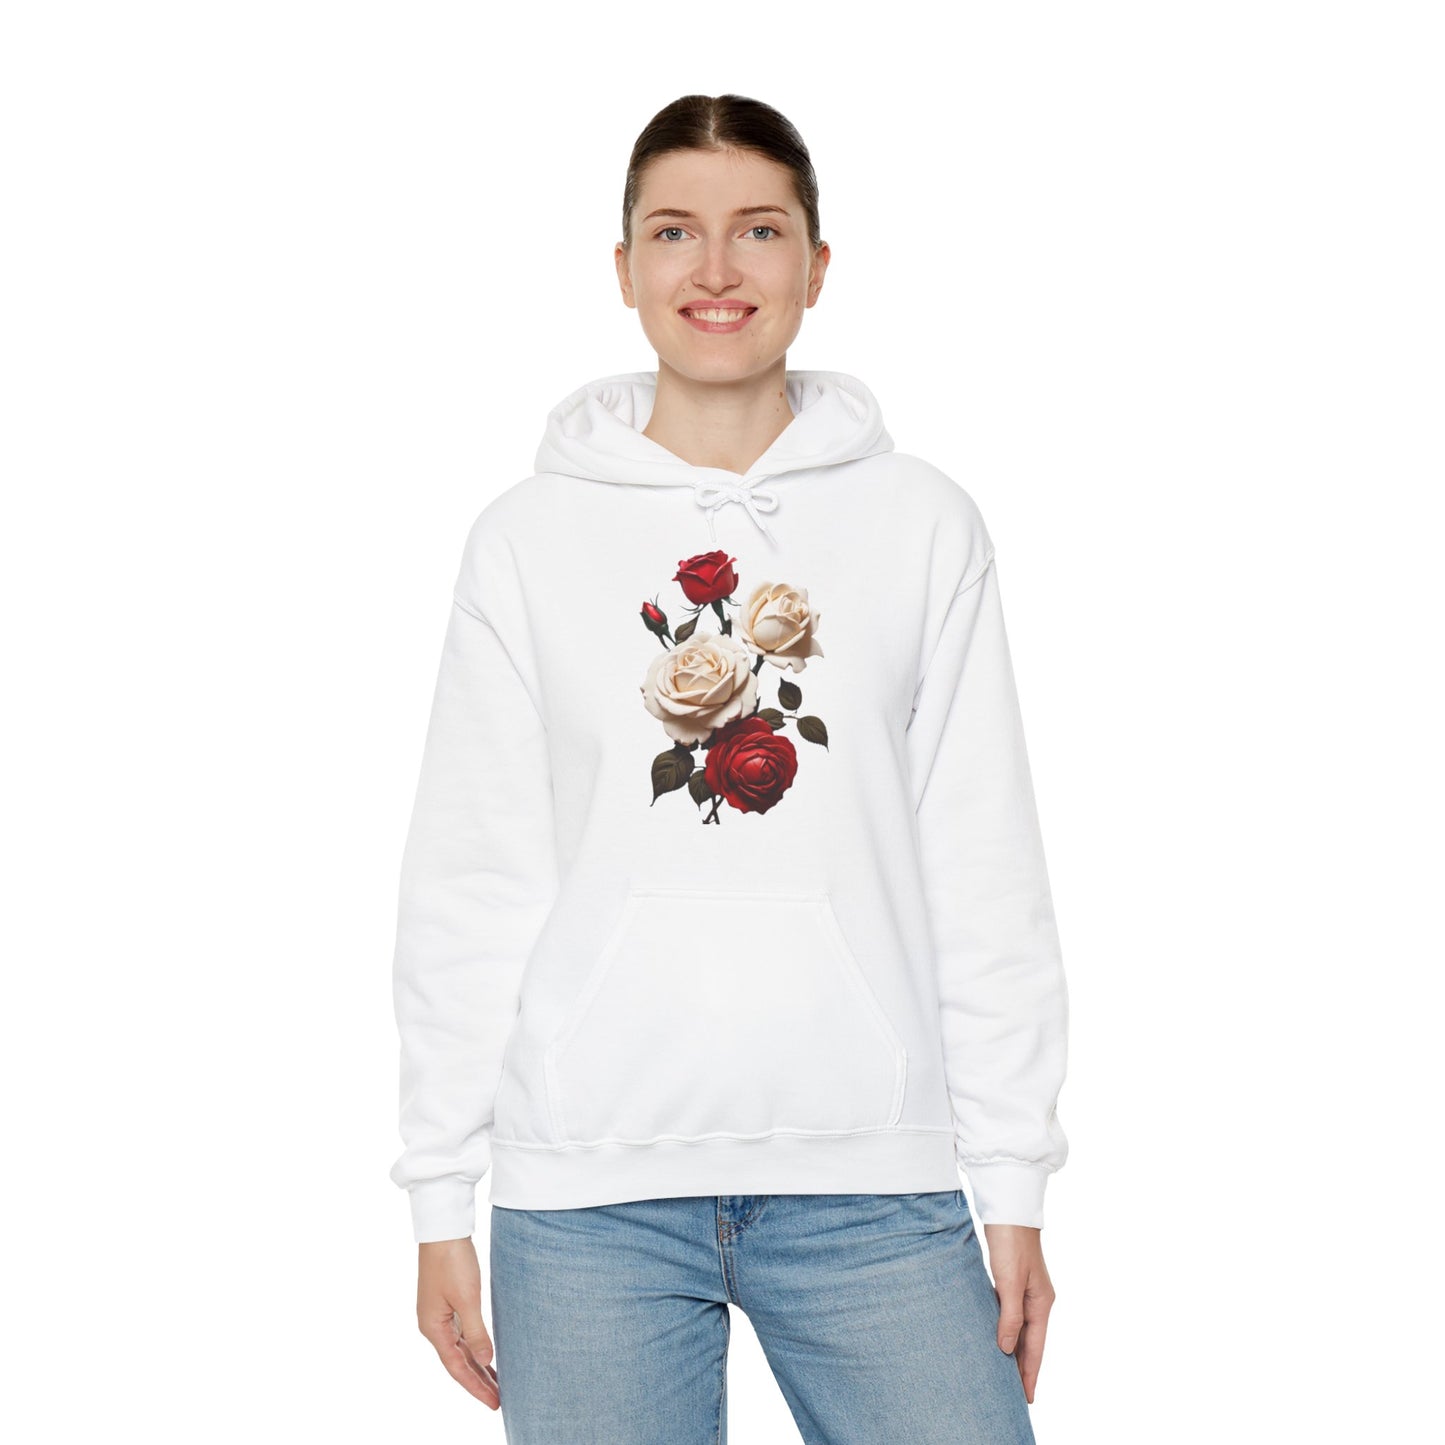 Red and White Roses - Unisex Hooded Sweatshirt